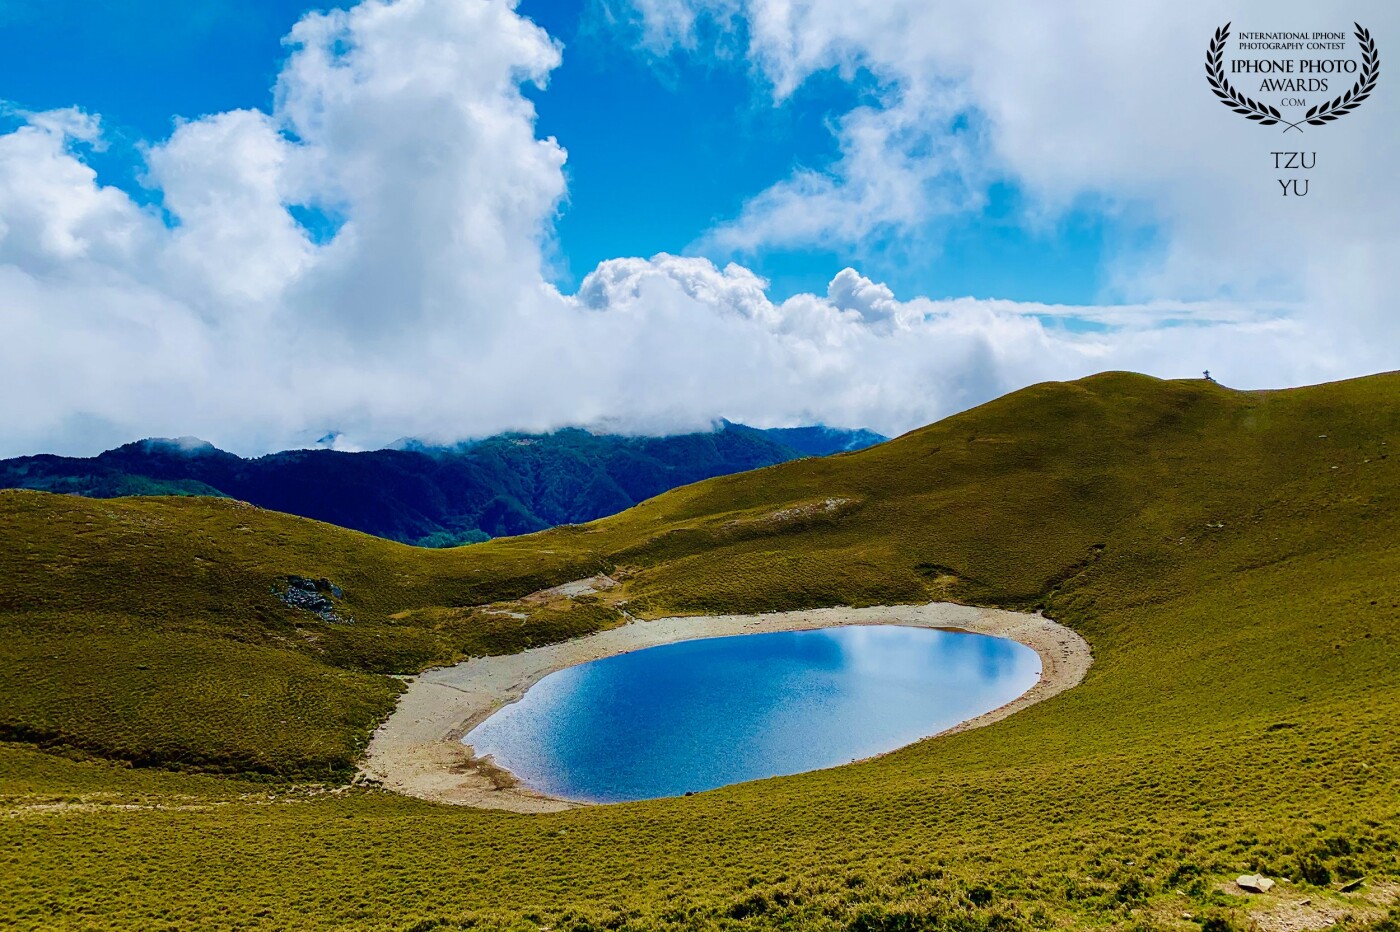 This is what I think is the most beautiful alpine lake in Taiwan, "Jiaming Lake", also known as "Angel's Tears". After climbing for three days and two nights, I finally arrived. The clear lake reflected by the blue sky and white clouds is really attractive. Welcome to Taiwan. travel